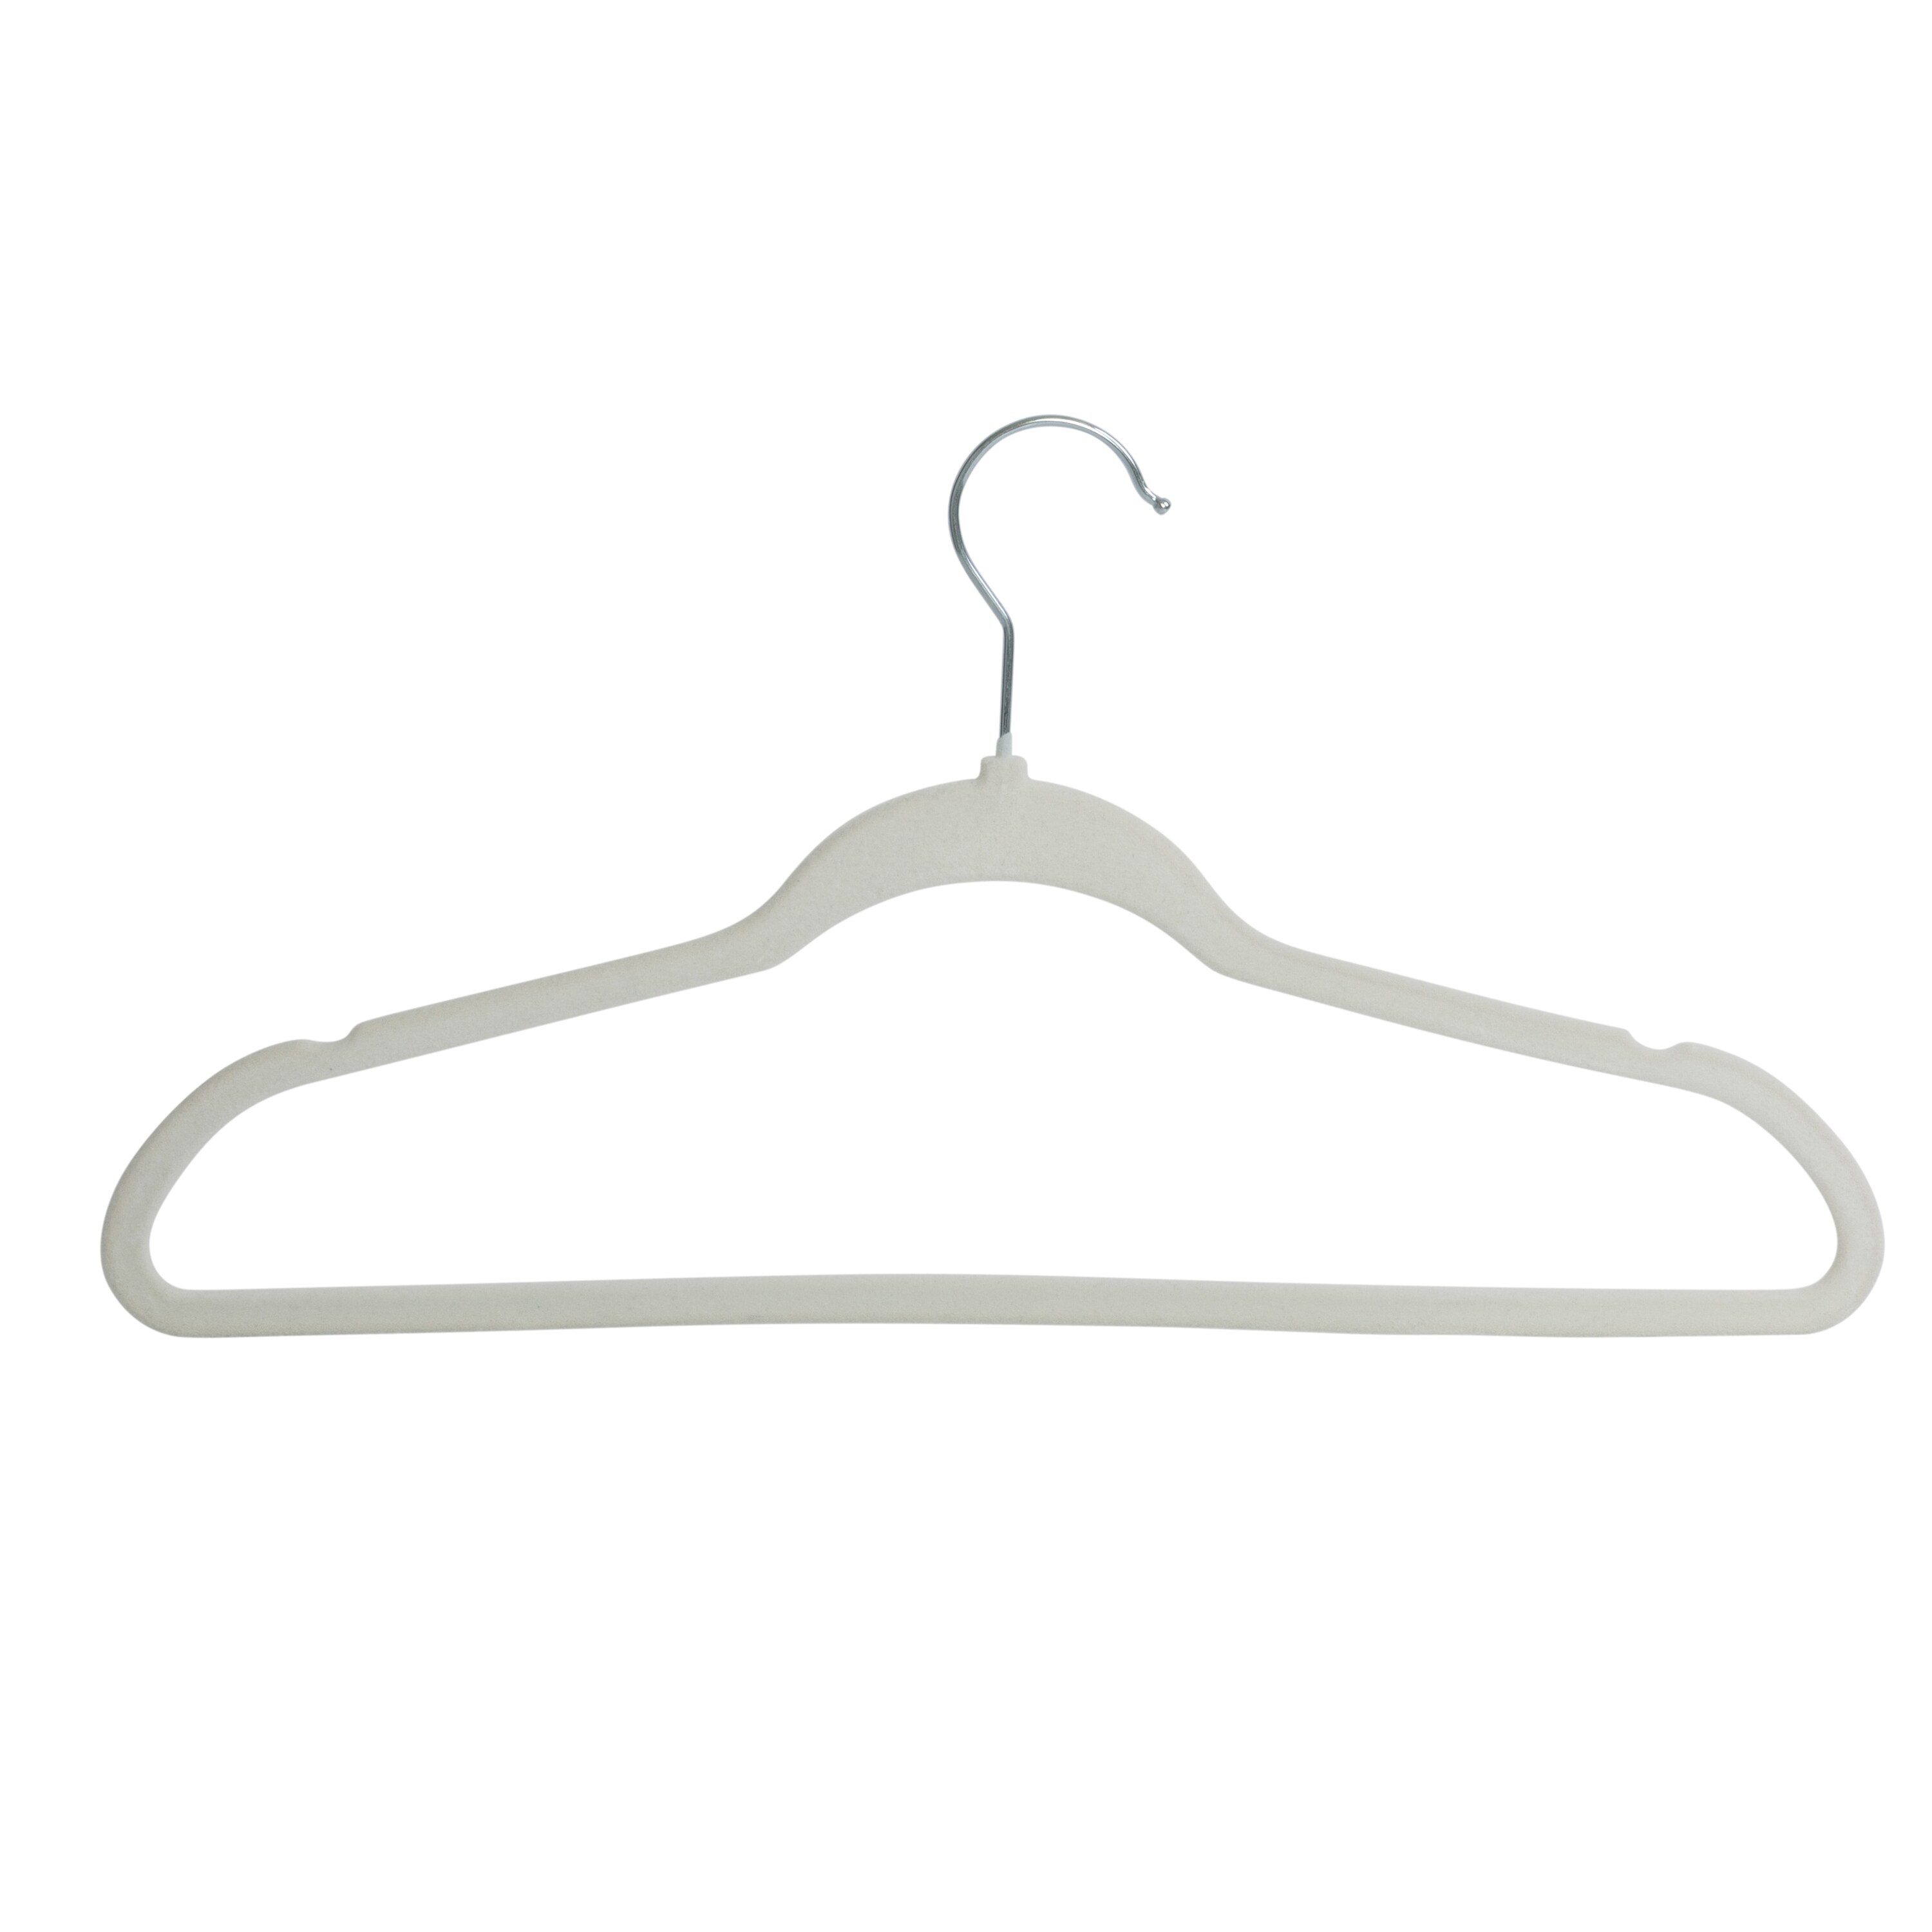 https://ak1.ostkcdn.com/images/products/is/images/direct/313f257bf0c8d6877e25c7cd2b7c486b487445e8/Plastic-and-Velvet-Non-Slip-Hangers-%2835-Pack%29.jpg